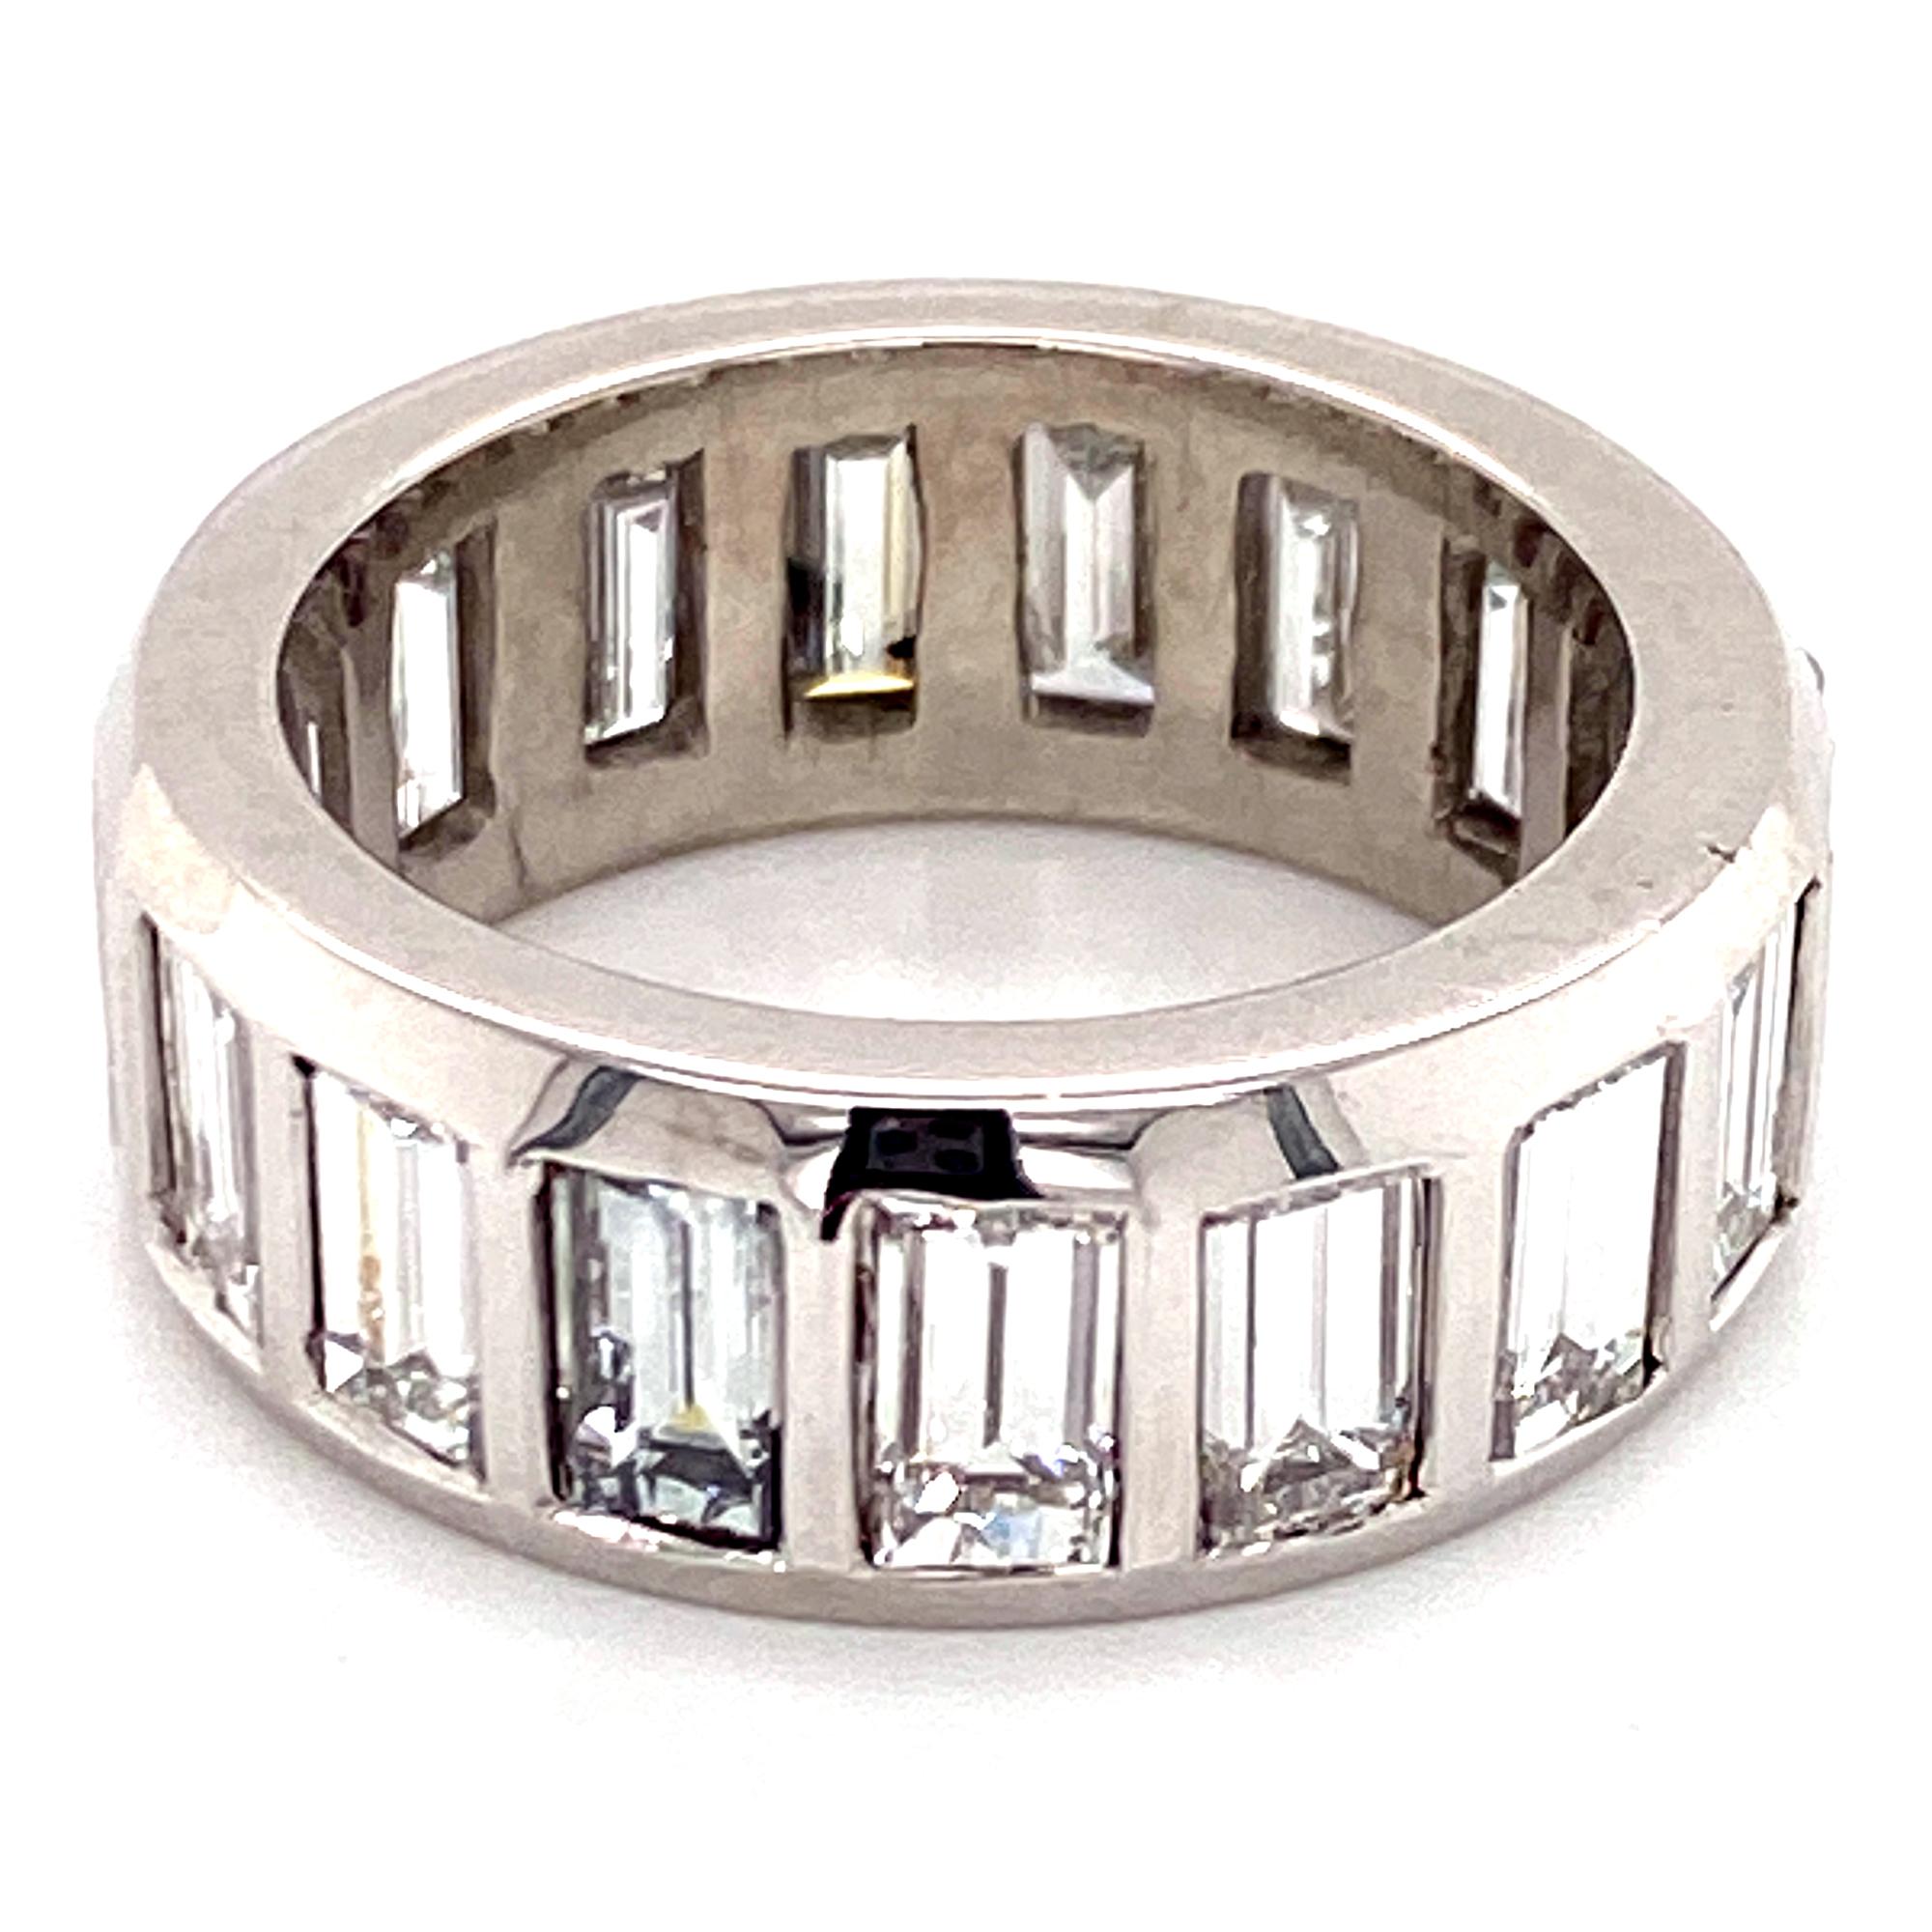 Gorgeous emerald cut diamond eternity band hand crafted in platinum. The band features 17 emerald cut diamonds weighing approximately 7.00 carat total weight. The diamonds are graded H-I color and VS clarity. The ring is size 6.5, and measures